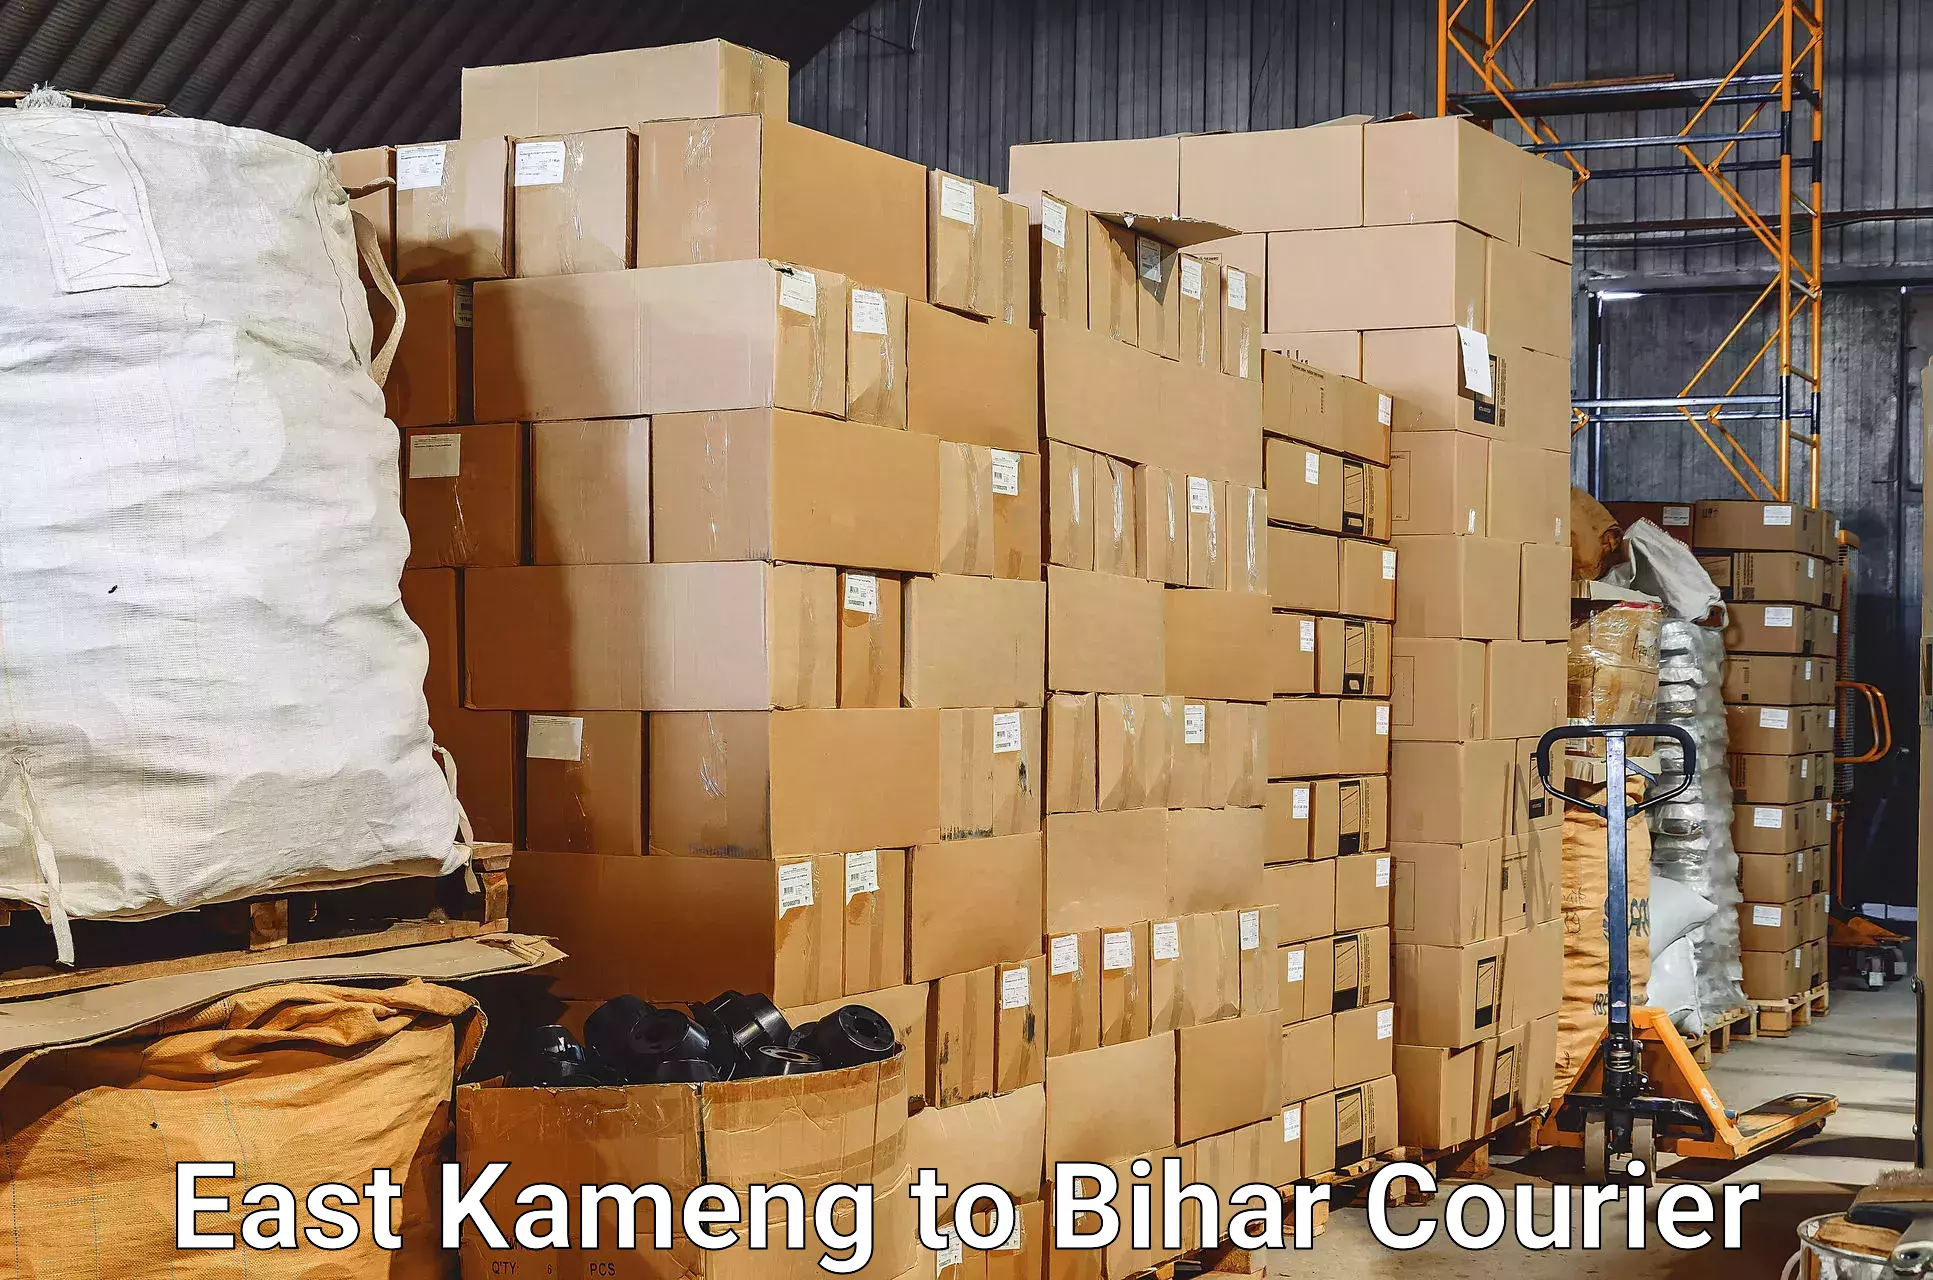 Regional luggage transport in East Kameng to Bagaha